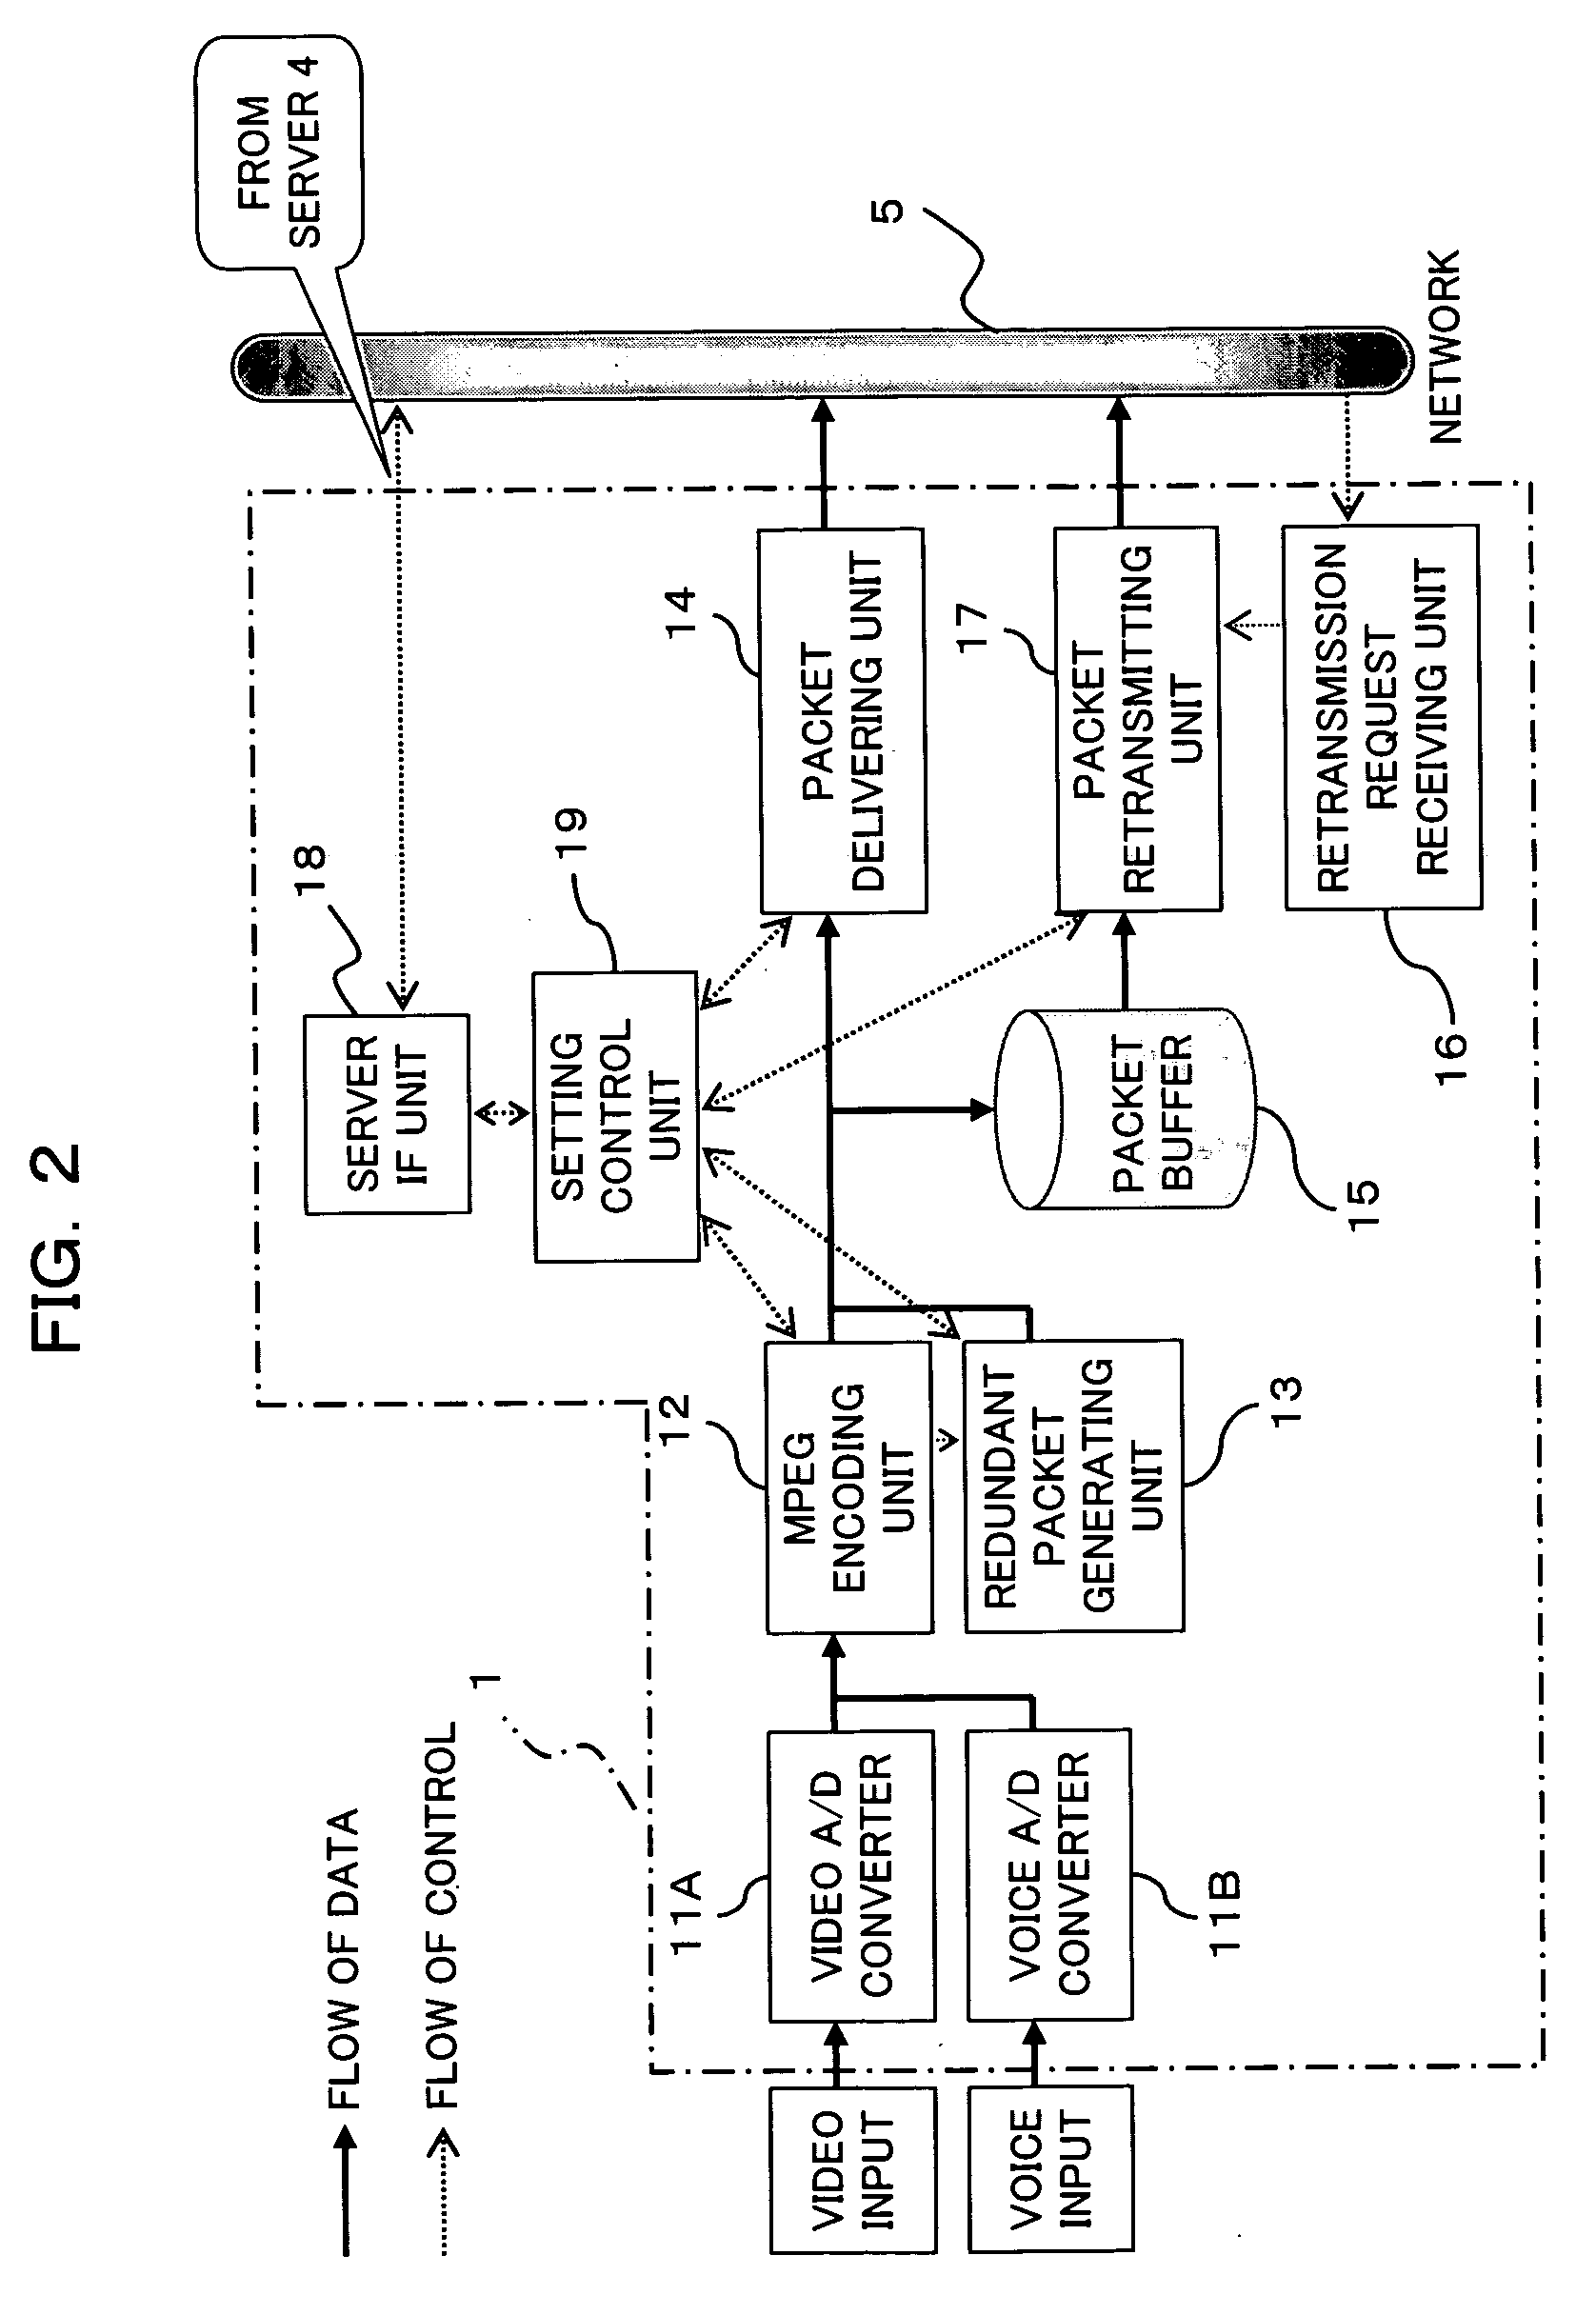 Apparatus and method for packet error correction